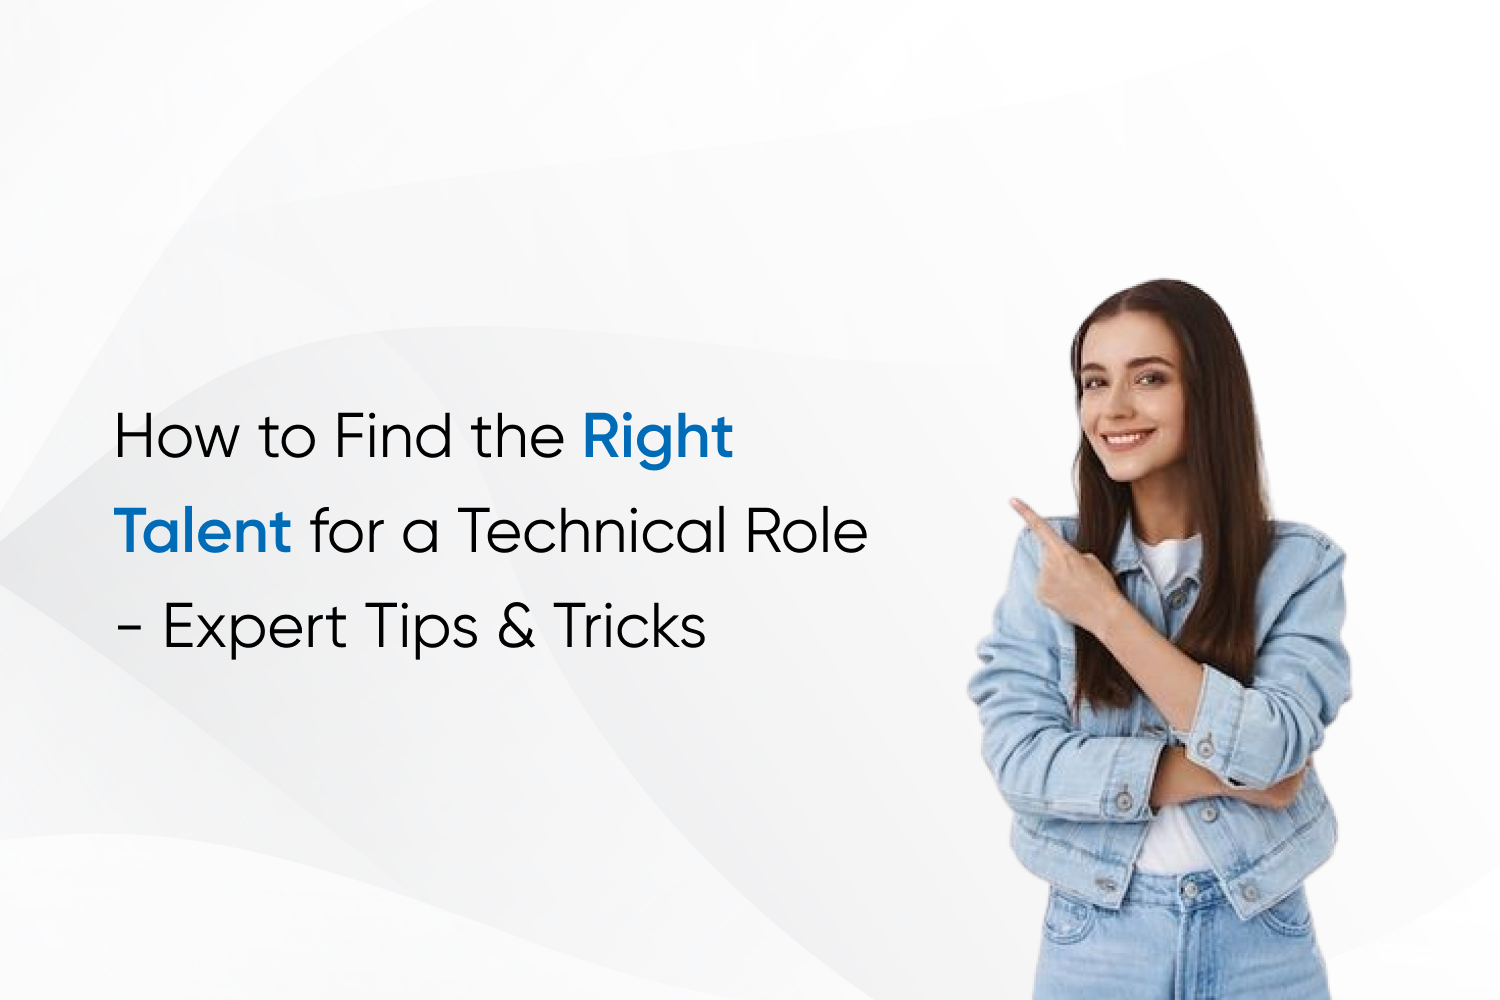 How to Find the Right Talent for a Technical Role - Expert Tips & Tricks